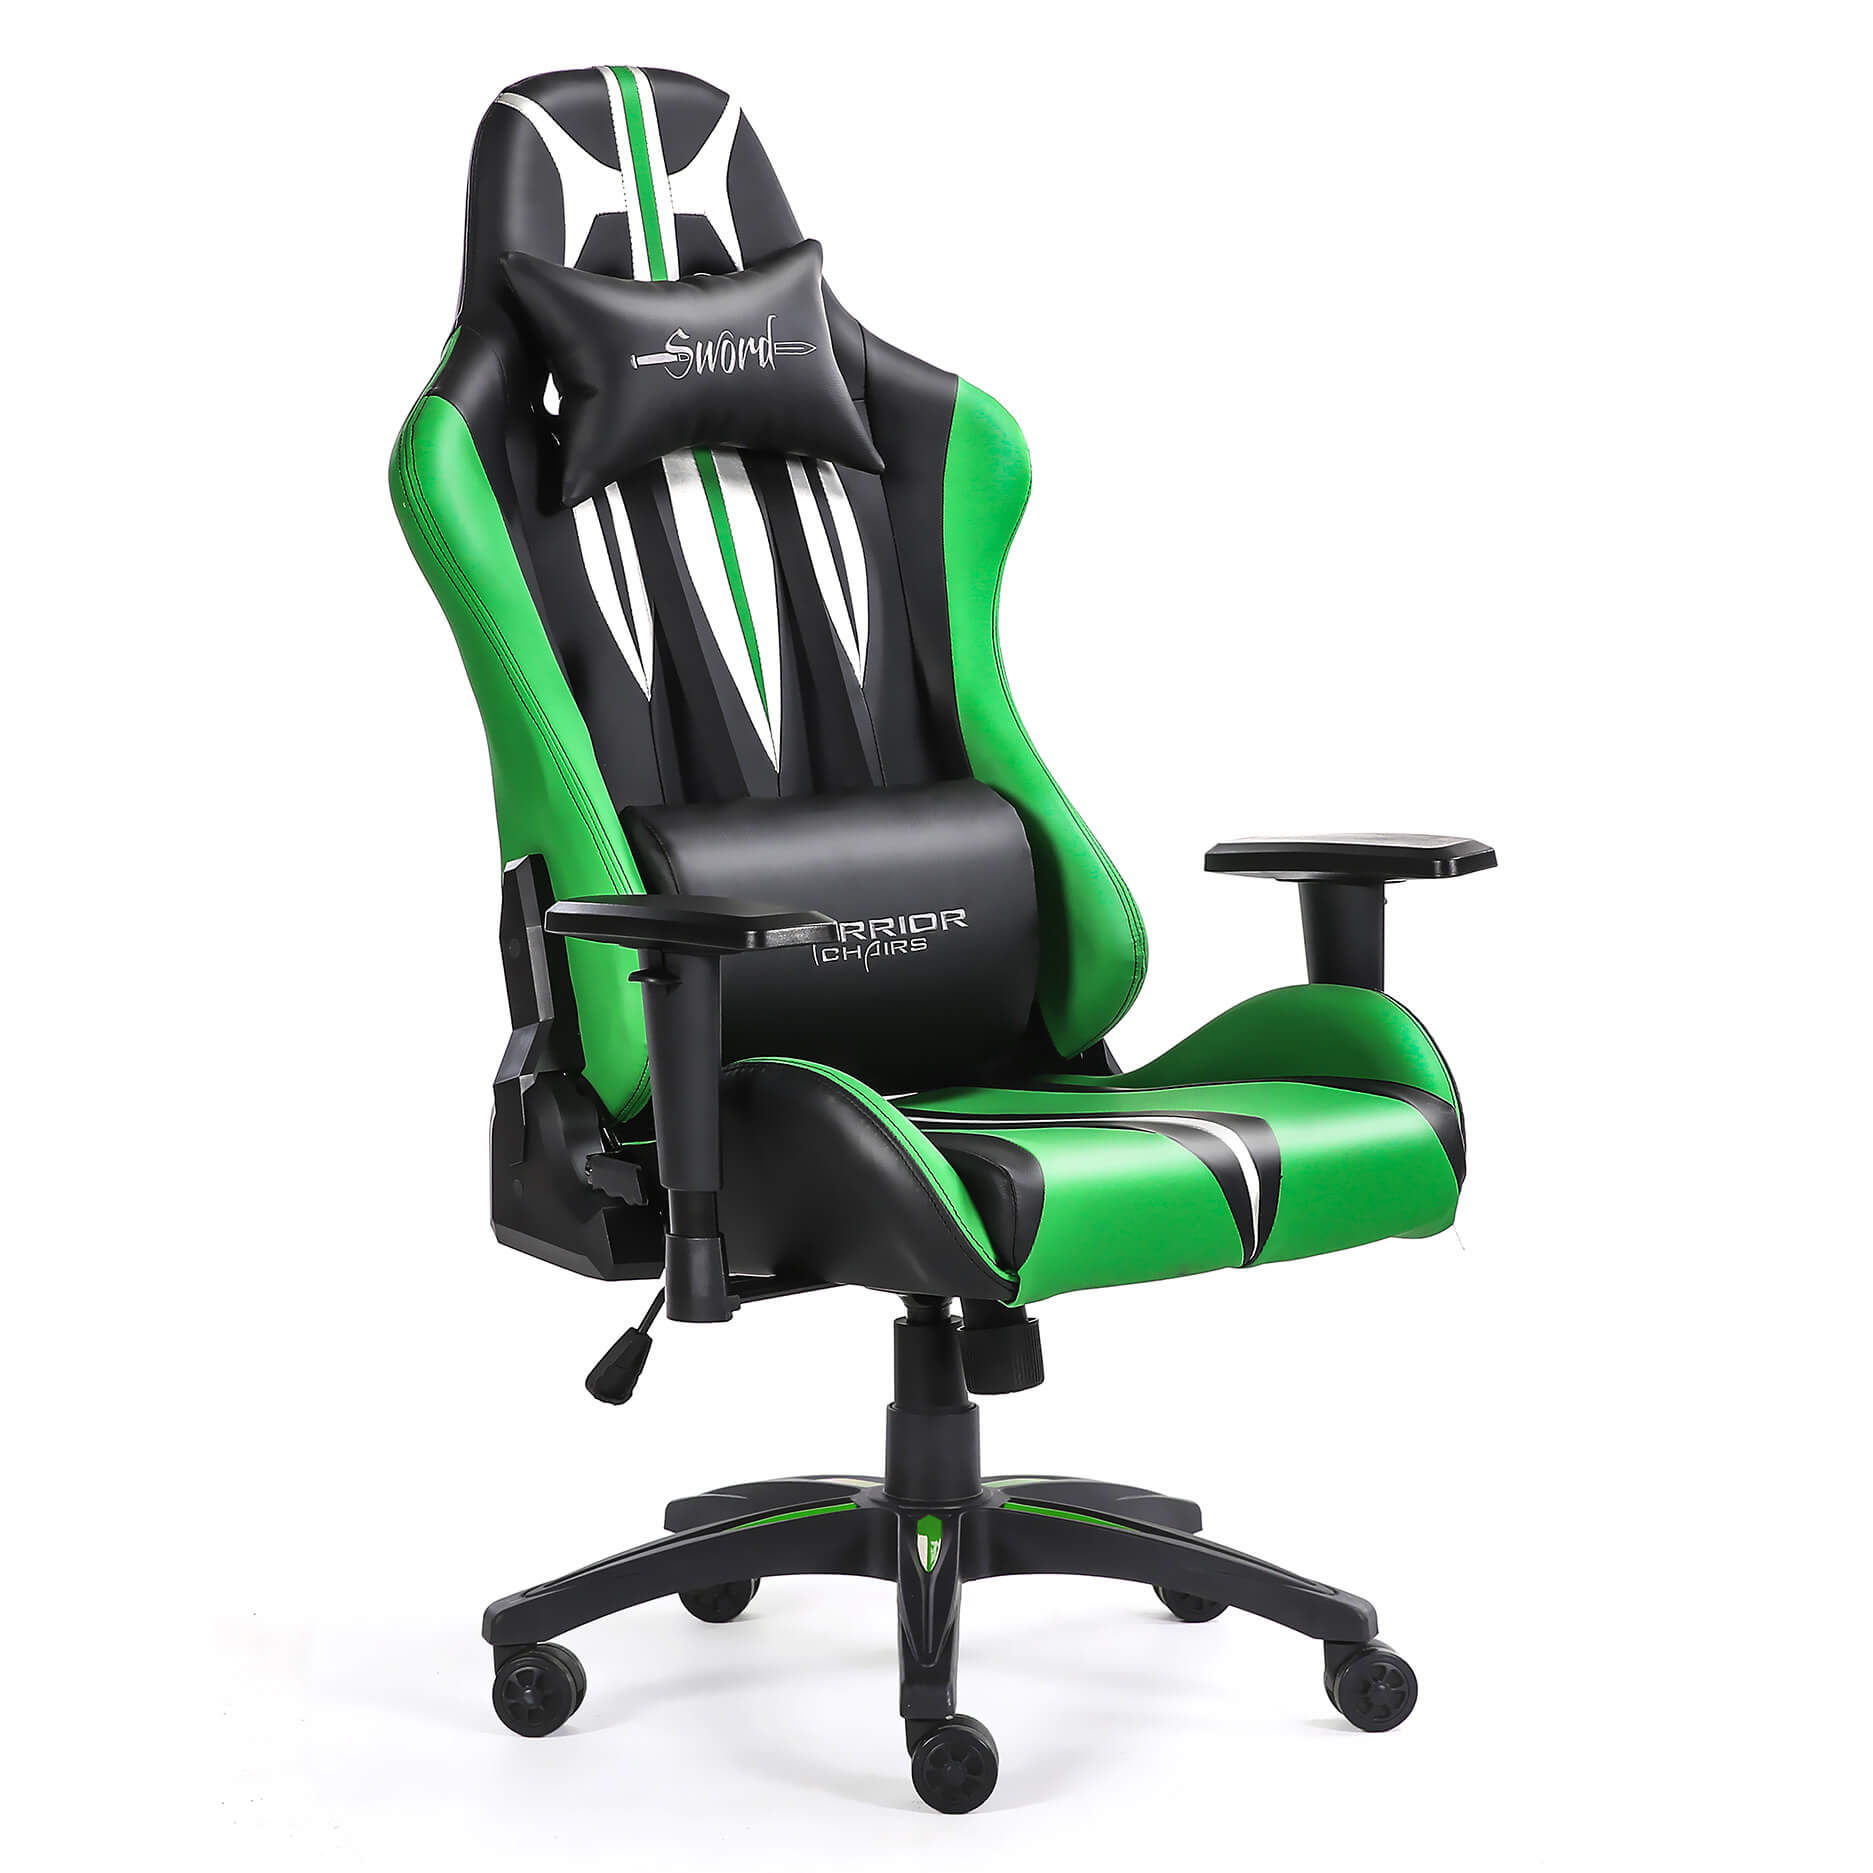 Fotel Obrotowy Biurowy Dla Graczy Arozzi Monza Red Game Room Chairs Gaming Chair Best Computer Chairs